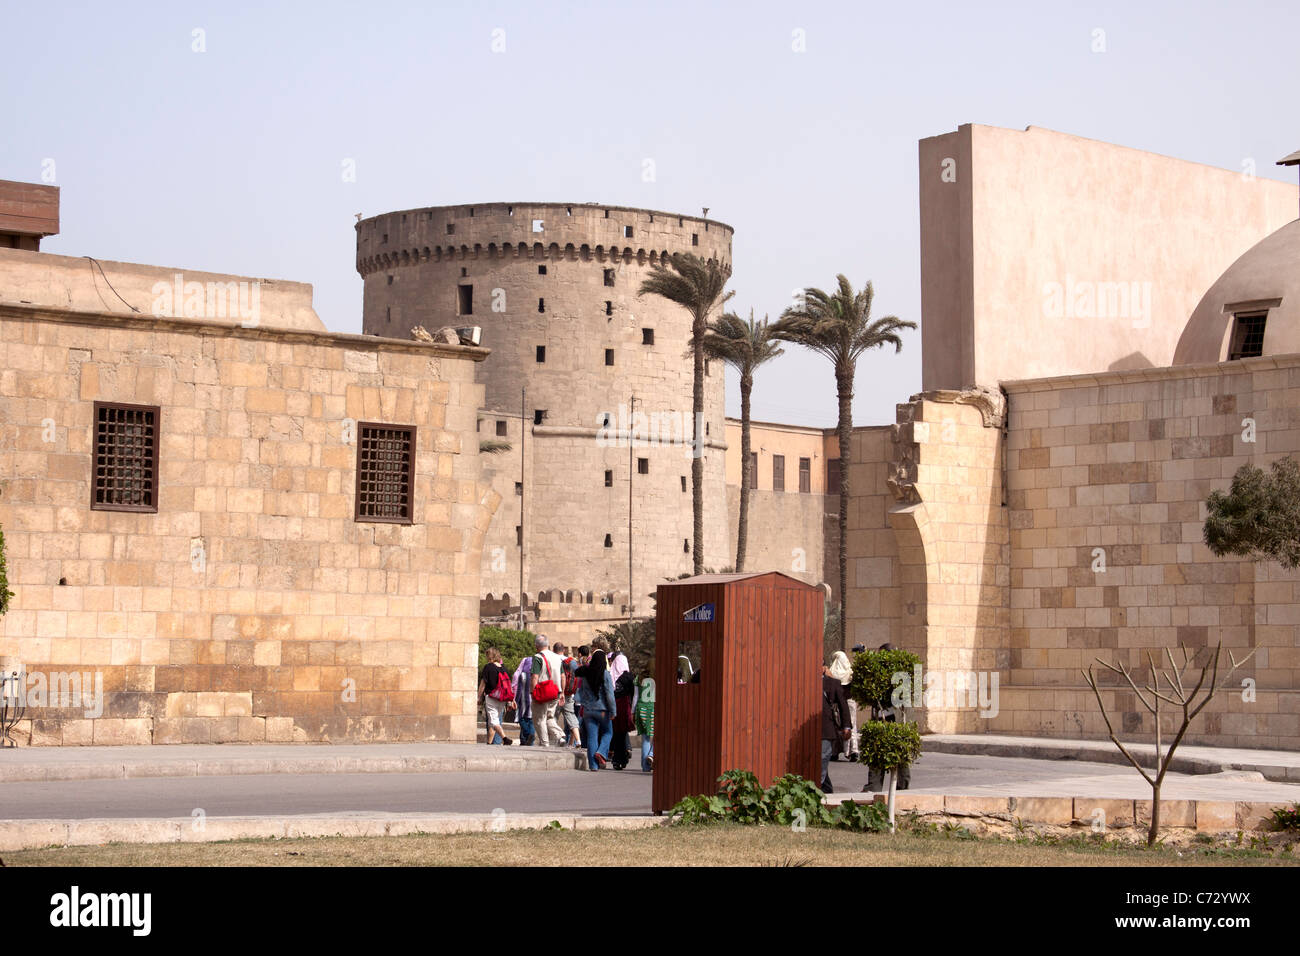 People entering through the gates of the Saladin Citadel. The Saladin Citadel is built on the Mokattam hill in Center. Stock Photo